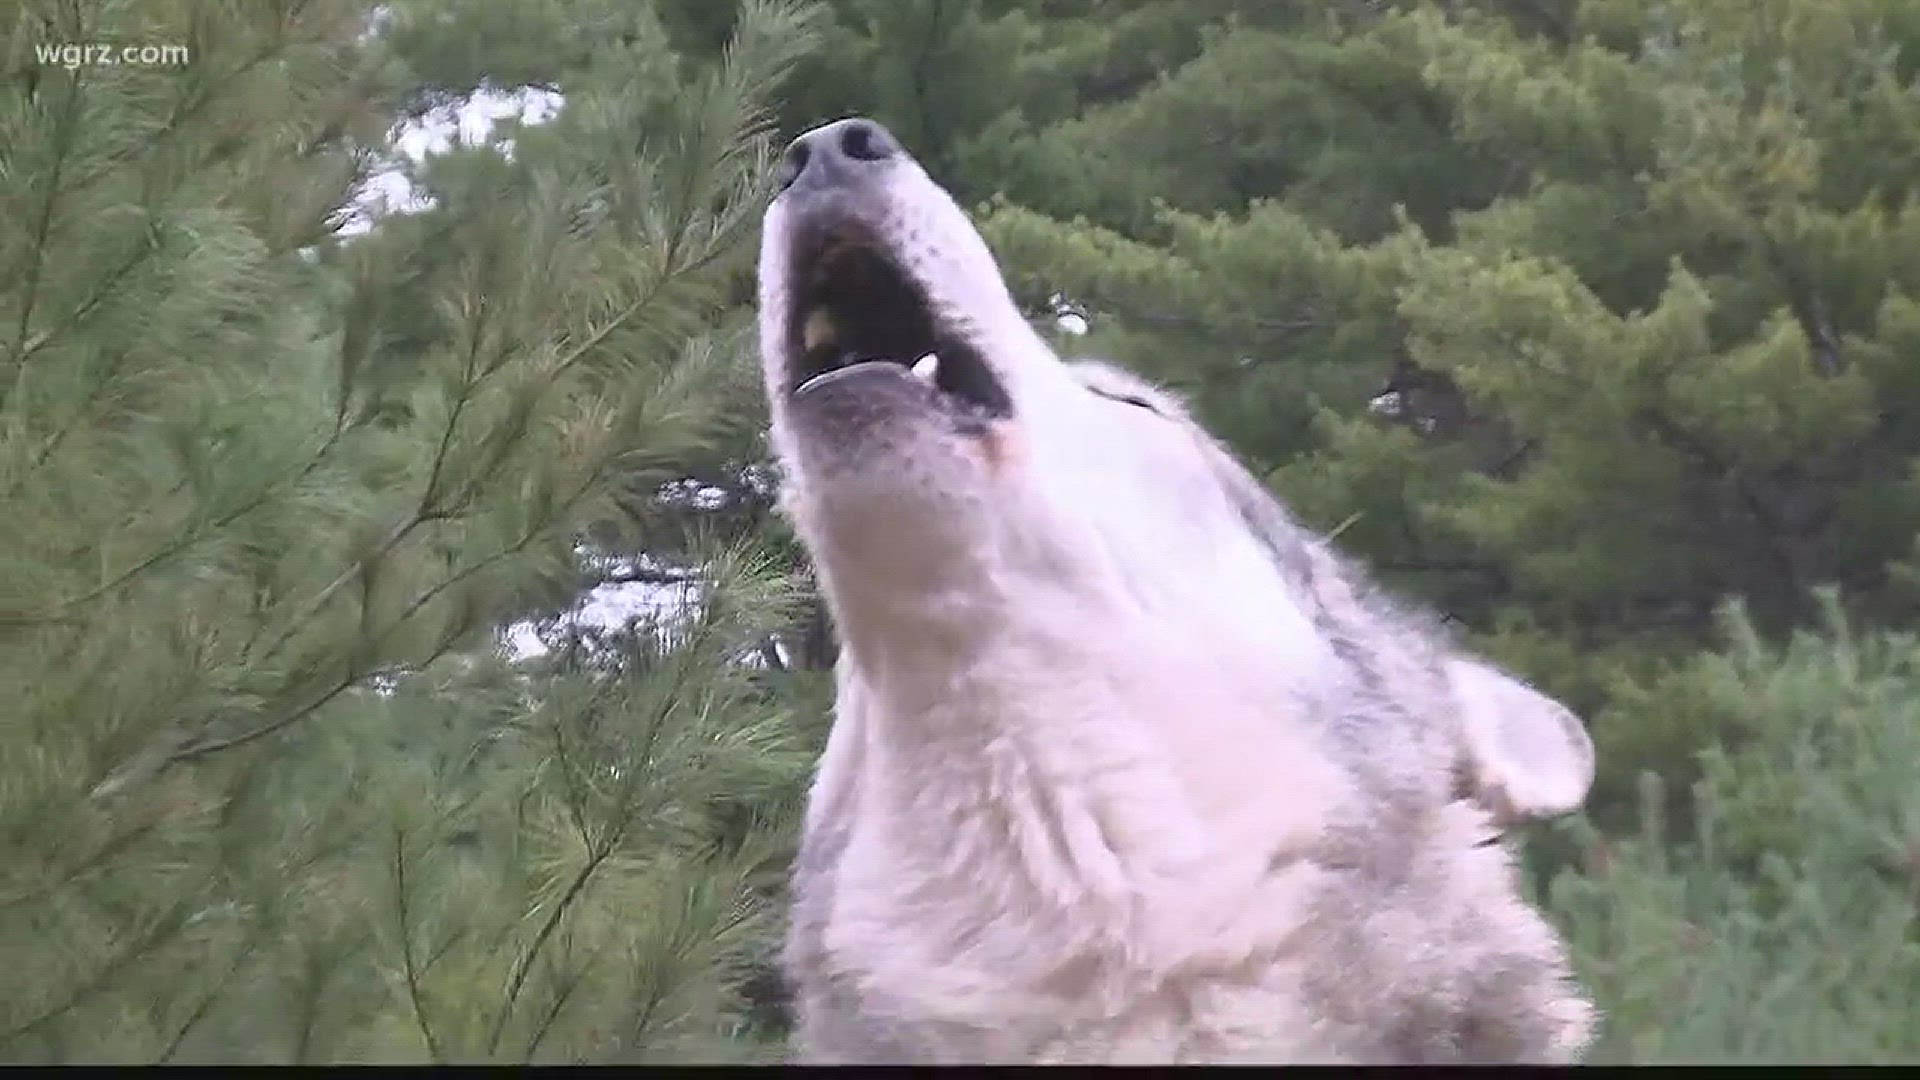 Channel 2's Terry Belke introduces us to the "Wolftalkers" in this week's 2 the Outdoors.